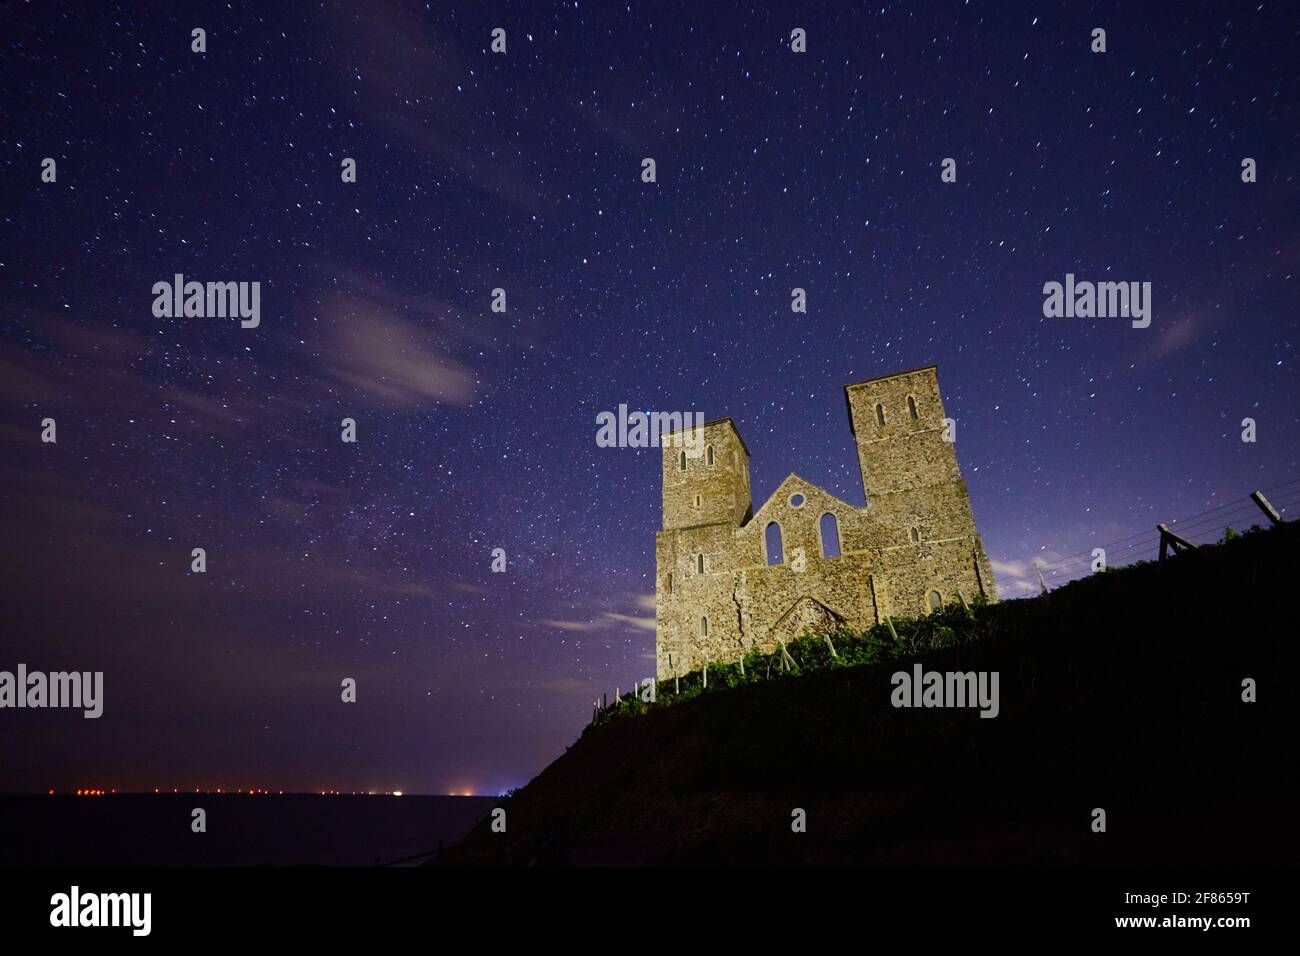 Reculver, Kent, UK. 12th April 2021: UK Weather. Clear skies with stars and a few clouds overnight of the 11th/12th April at the ruined church at Reculver, abandoned due to erosion by the sea in the early 19th century, its distinctive twin towers were saved as a navigation aid for ships. Wind farms and ships can be see on the horizon. Credit: Alan Payton/Alamy Live News Stock Photo